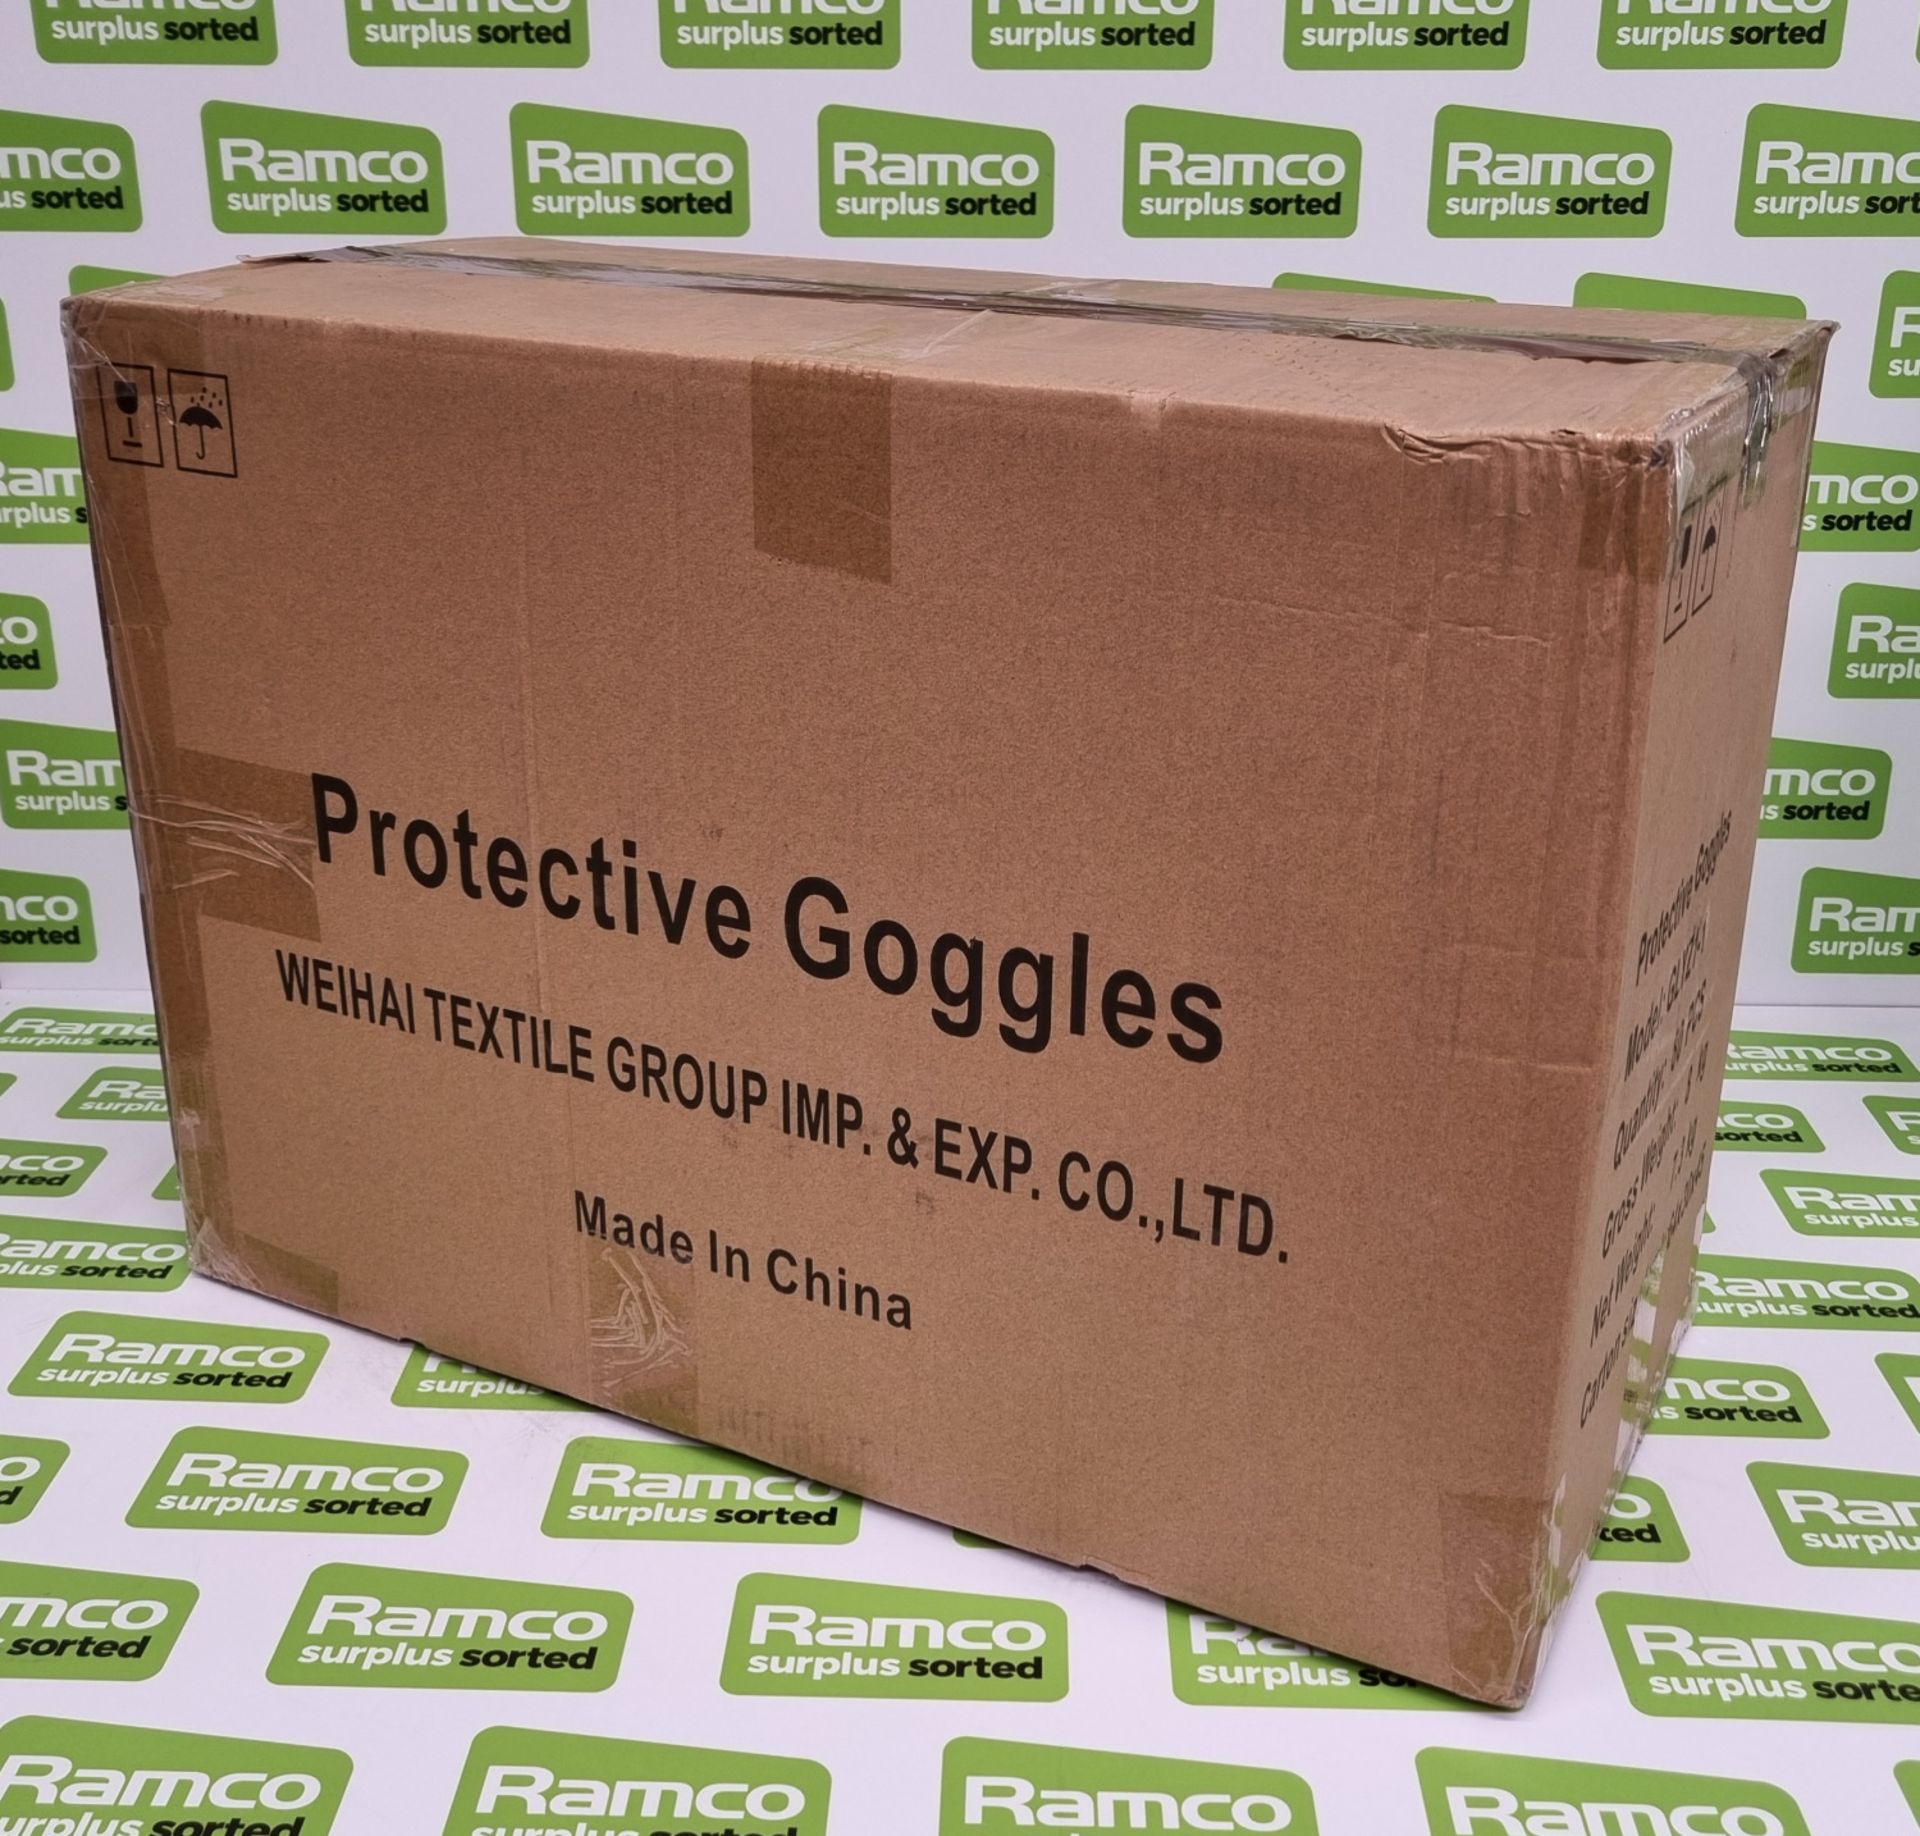 24x pallets of goggles - est. total qty 34560 - location LE67 1GQ - Image 3 of 7